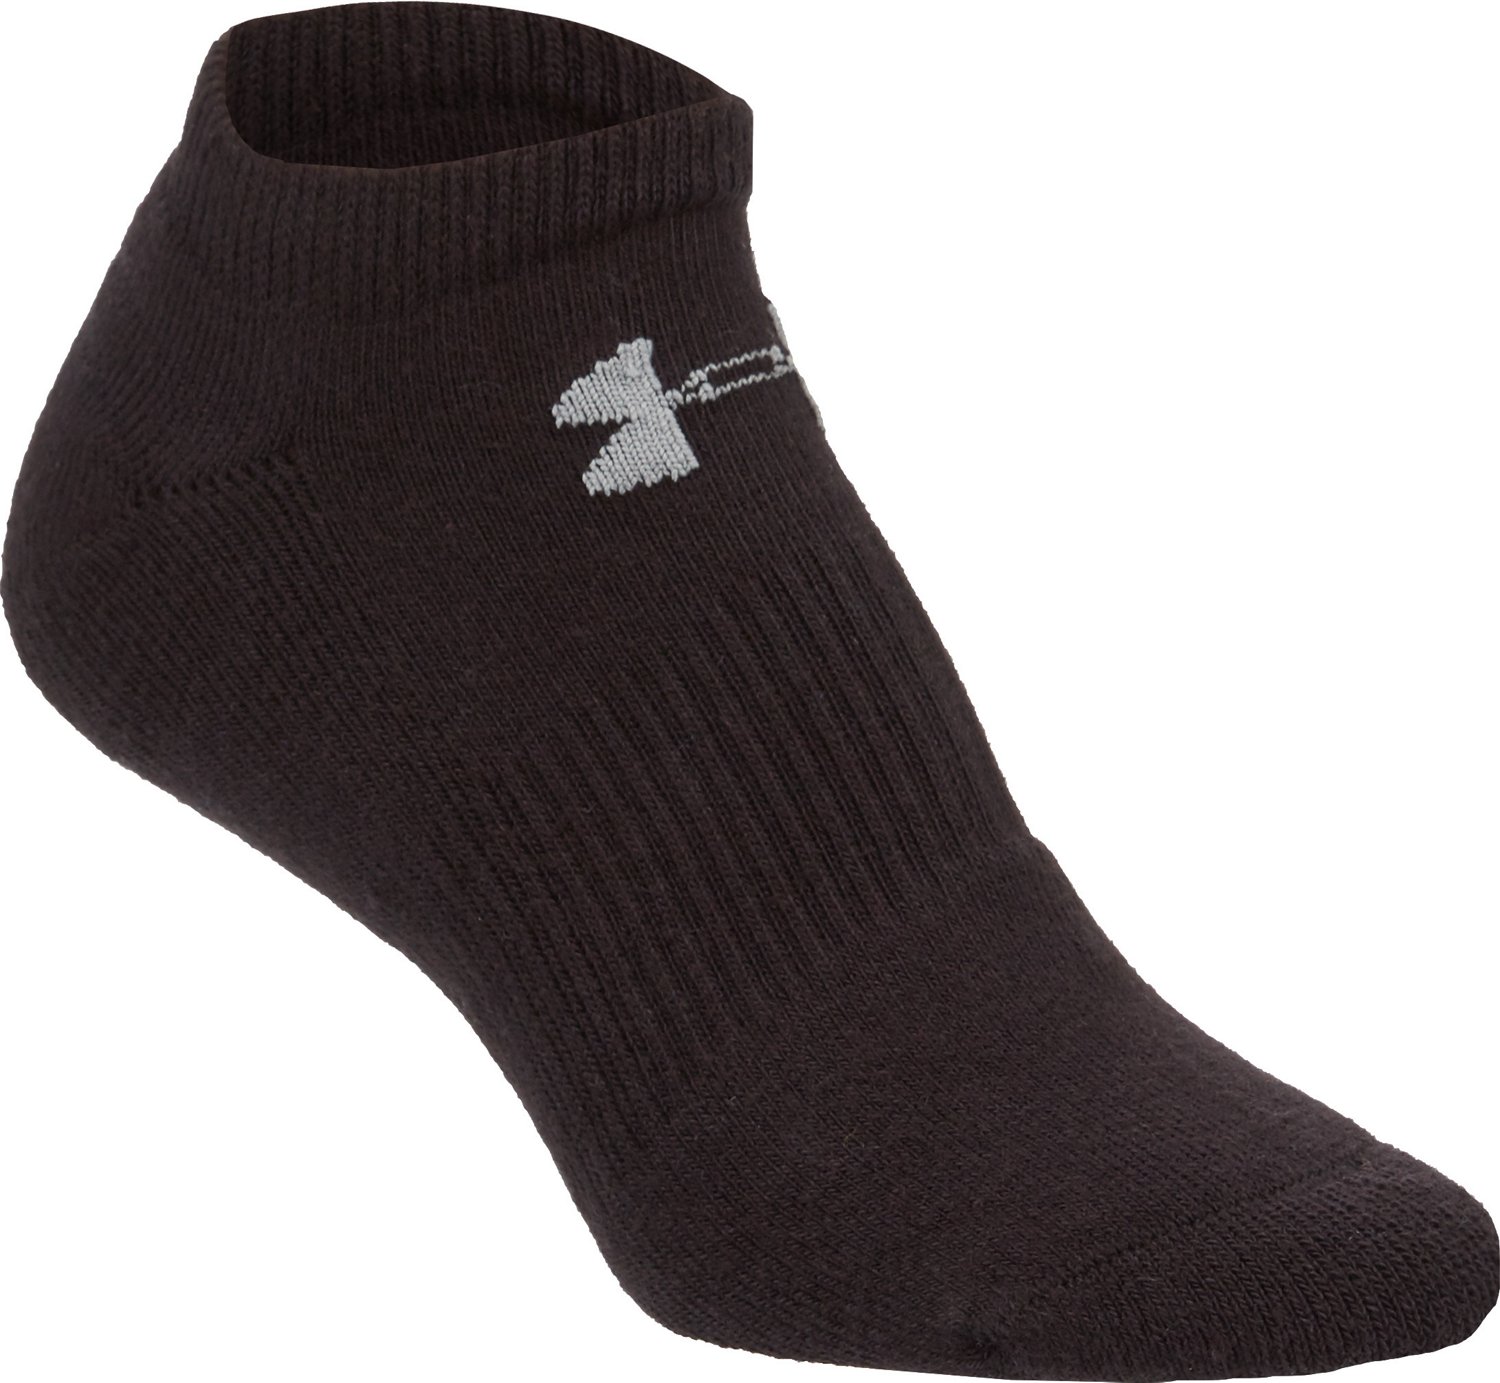 Under Armour Charged Cotton 2.0 No-Show Socks 6 Pack | Academy